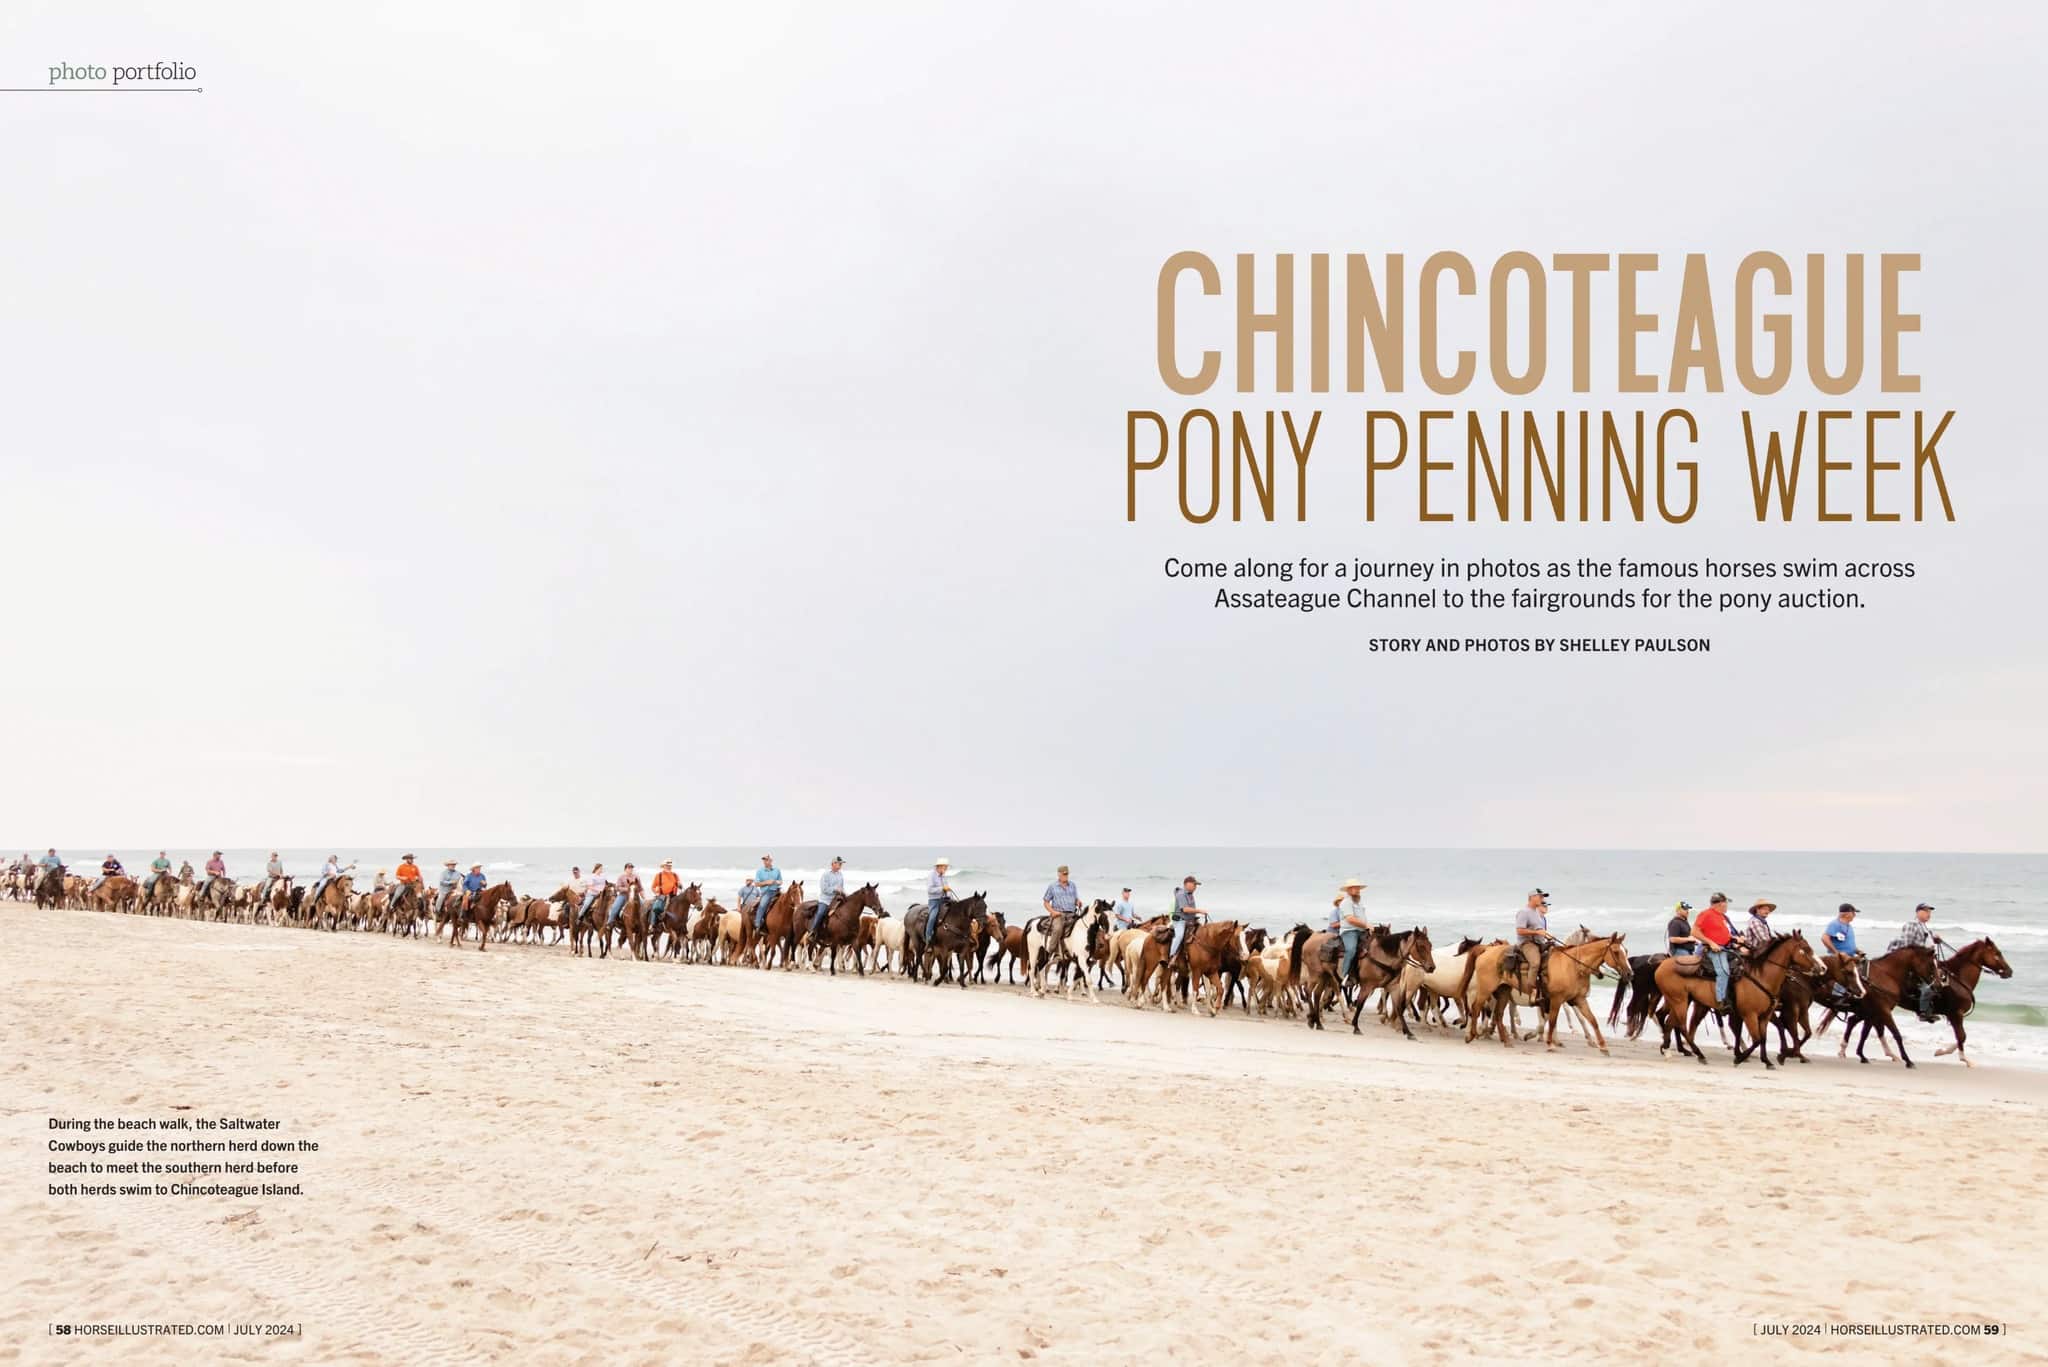 Chincoteague Pony Penning Week Feature in Horse Illustrated